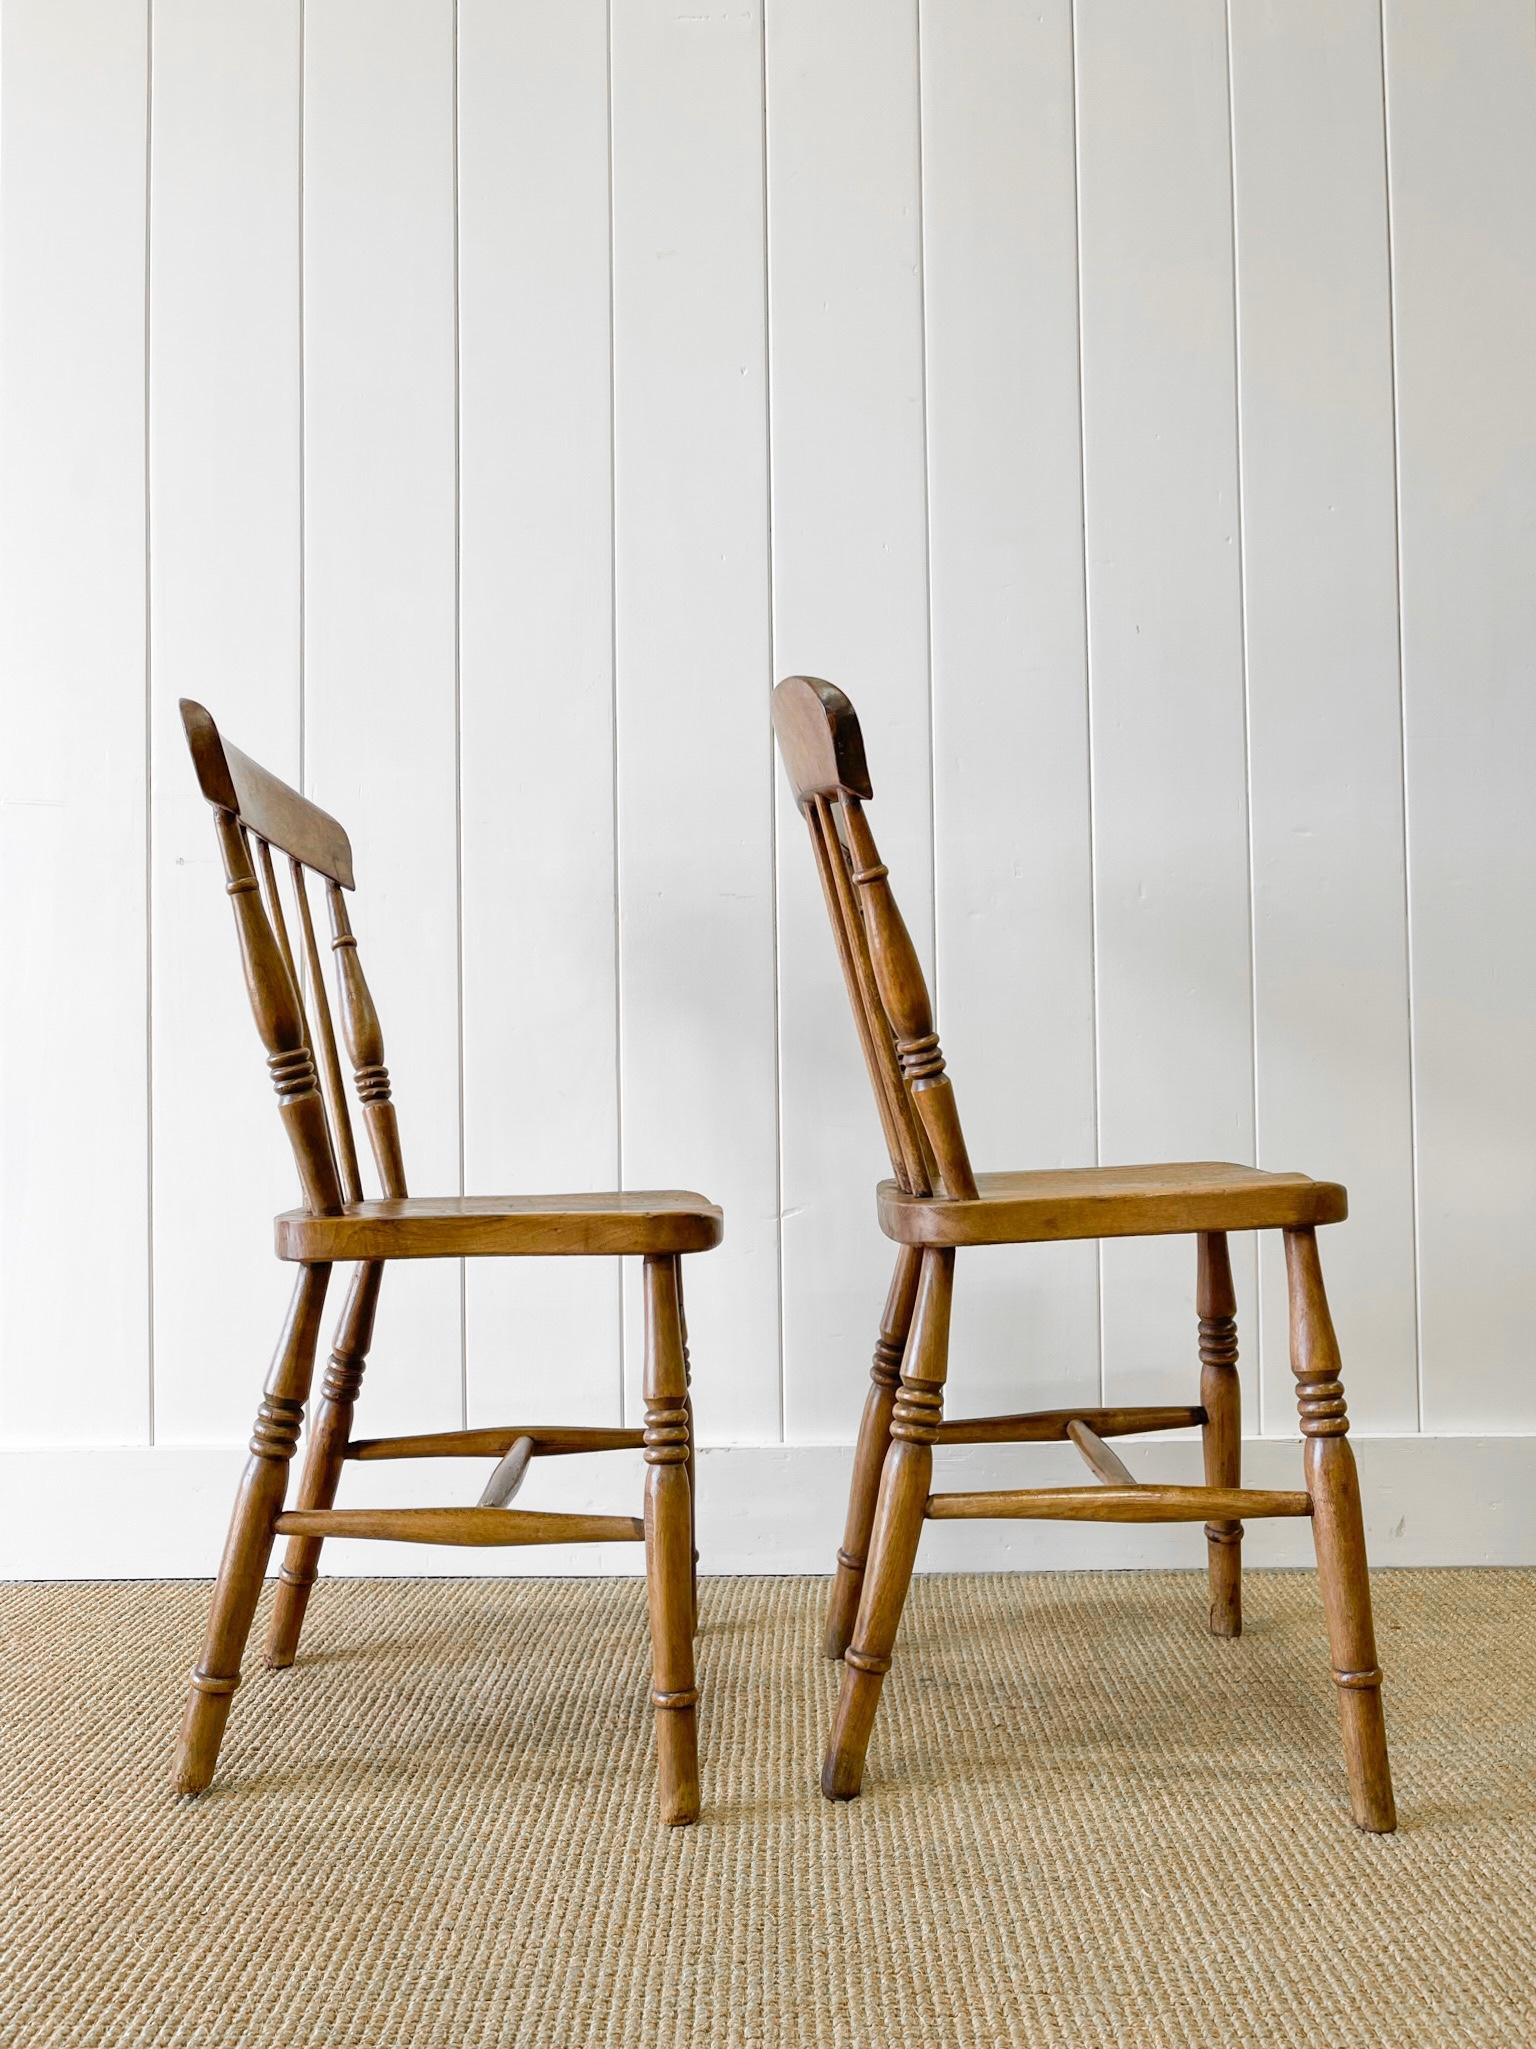 An Antique Set of 4 Early 19th Century Stick Back Chairs For Sale 10